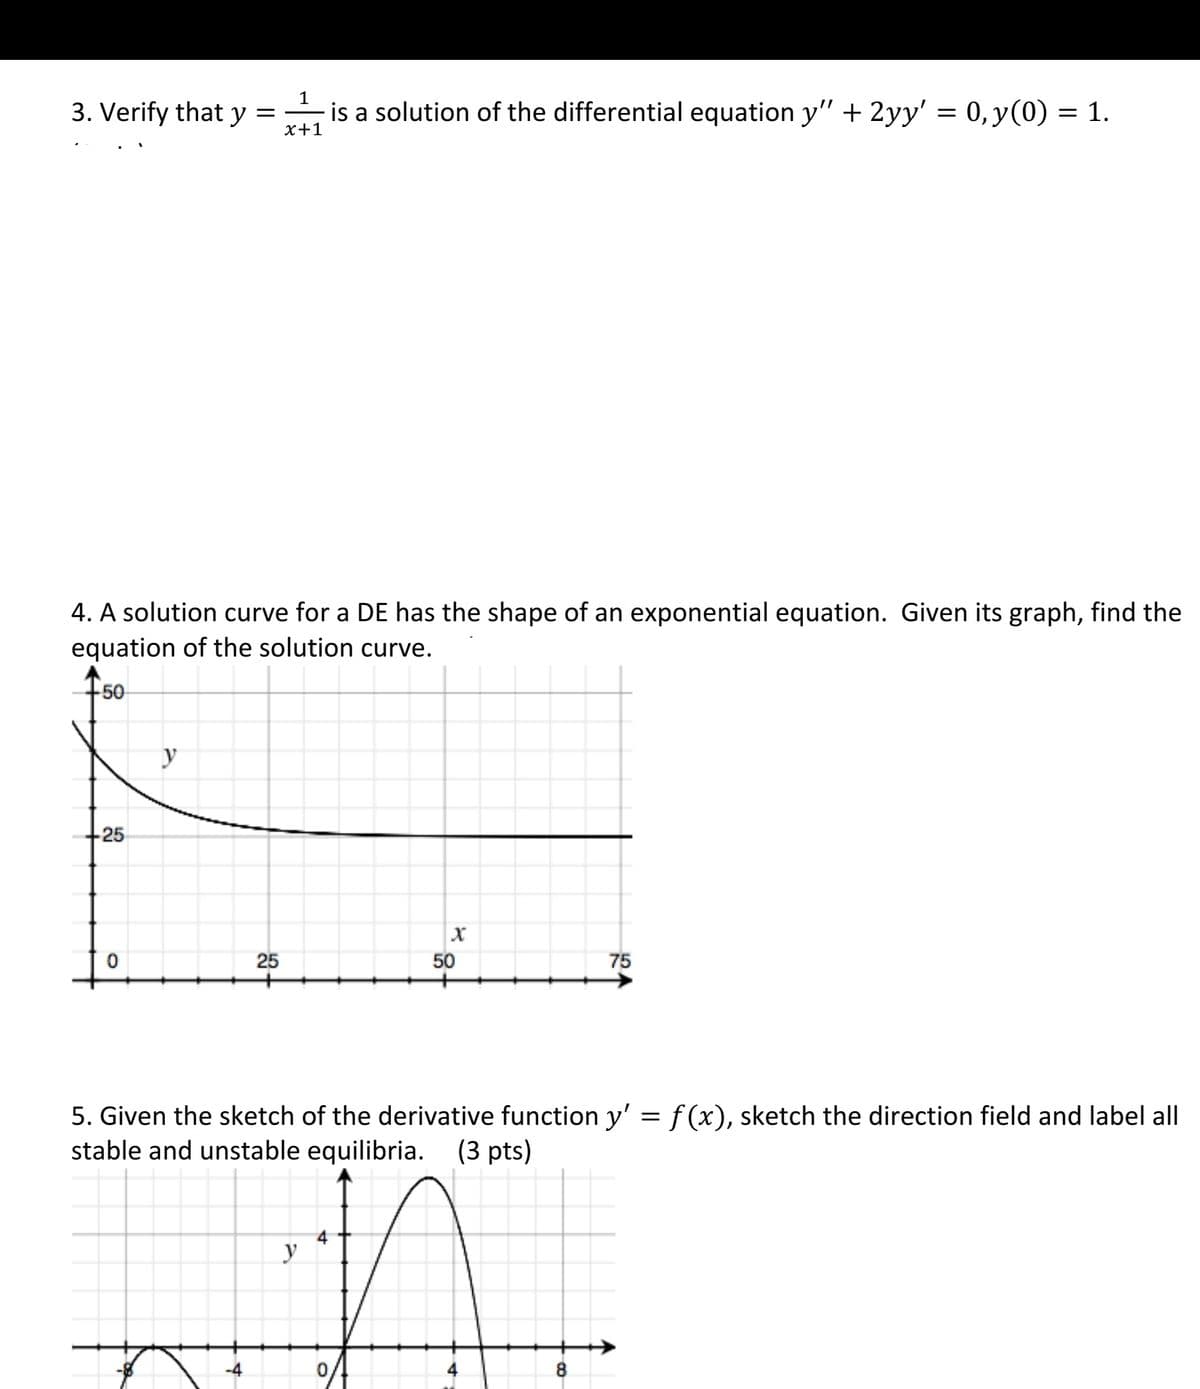 3. Verify that y =
is a solution of the differential equation y" + 2yy' = 0, y(0) = 1.
x+1
4. A solution curve for a DE has the shape of an exponential equation. Given its graph, find the
equation of the solution curve.
fo
50
y
25
25
50
75
5. Given the sketch of the derivative function y' = f(x), sketch the direction field and label all
stable and unstable equilibria. (3 pts)
4
y
8.
